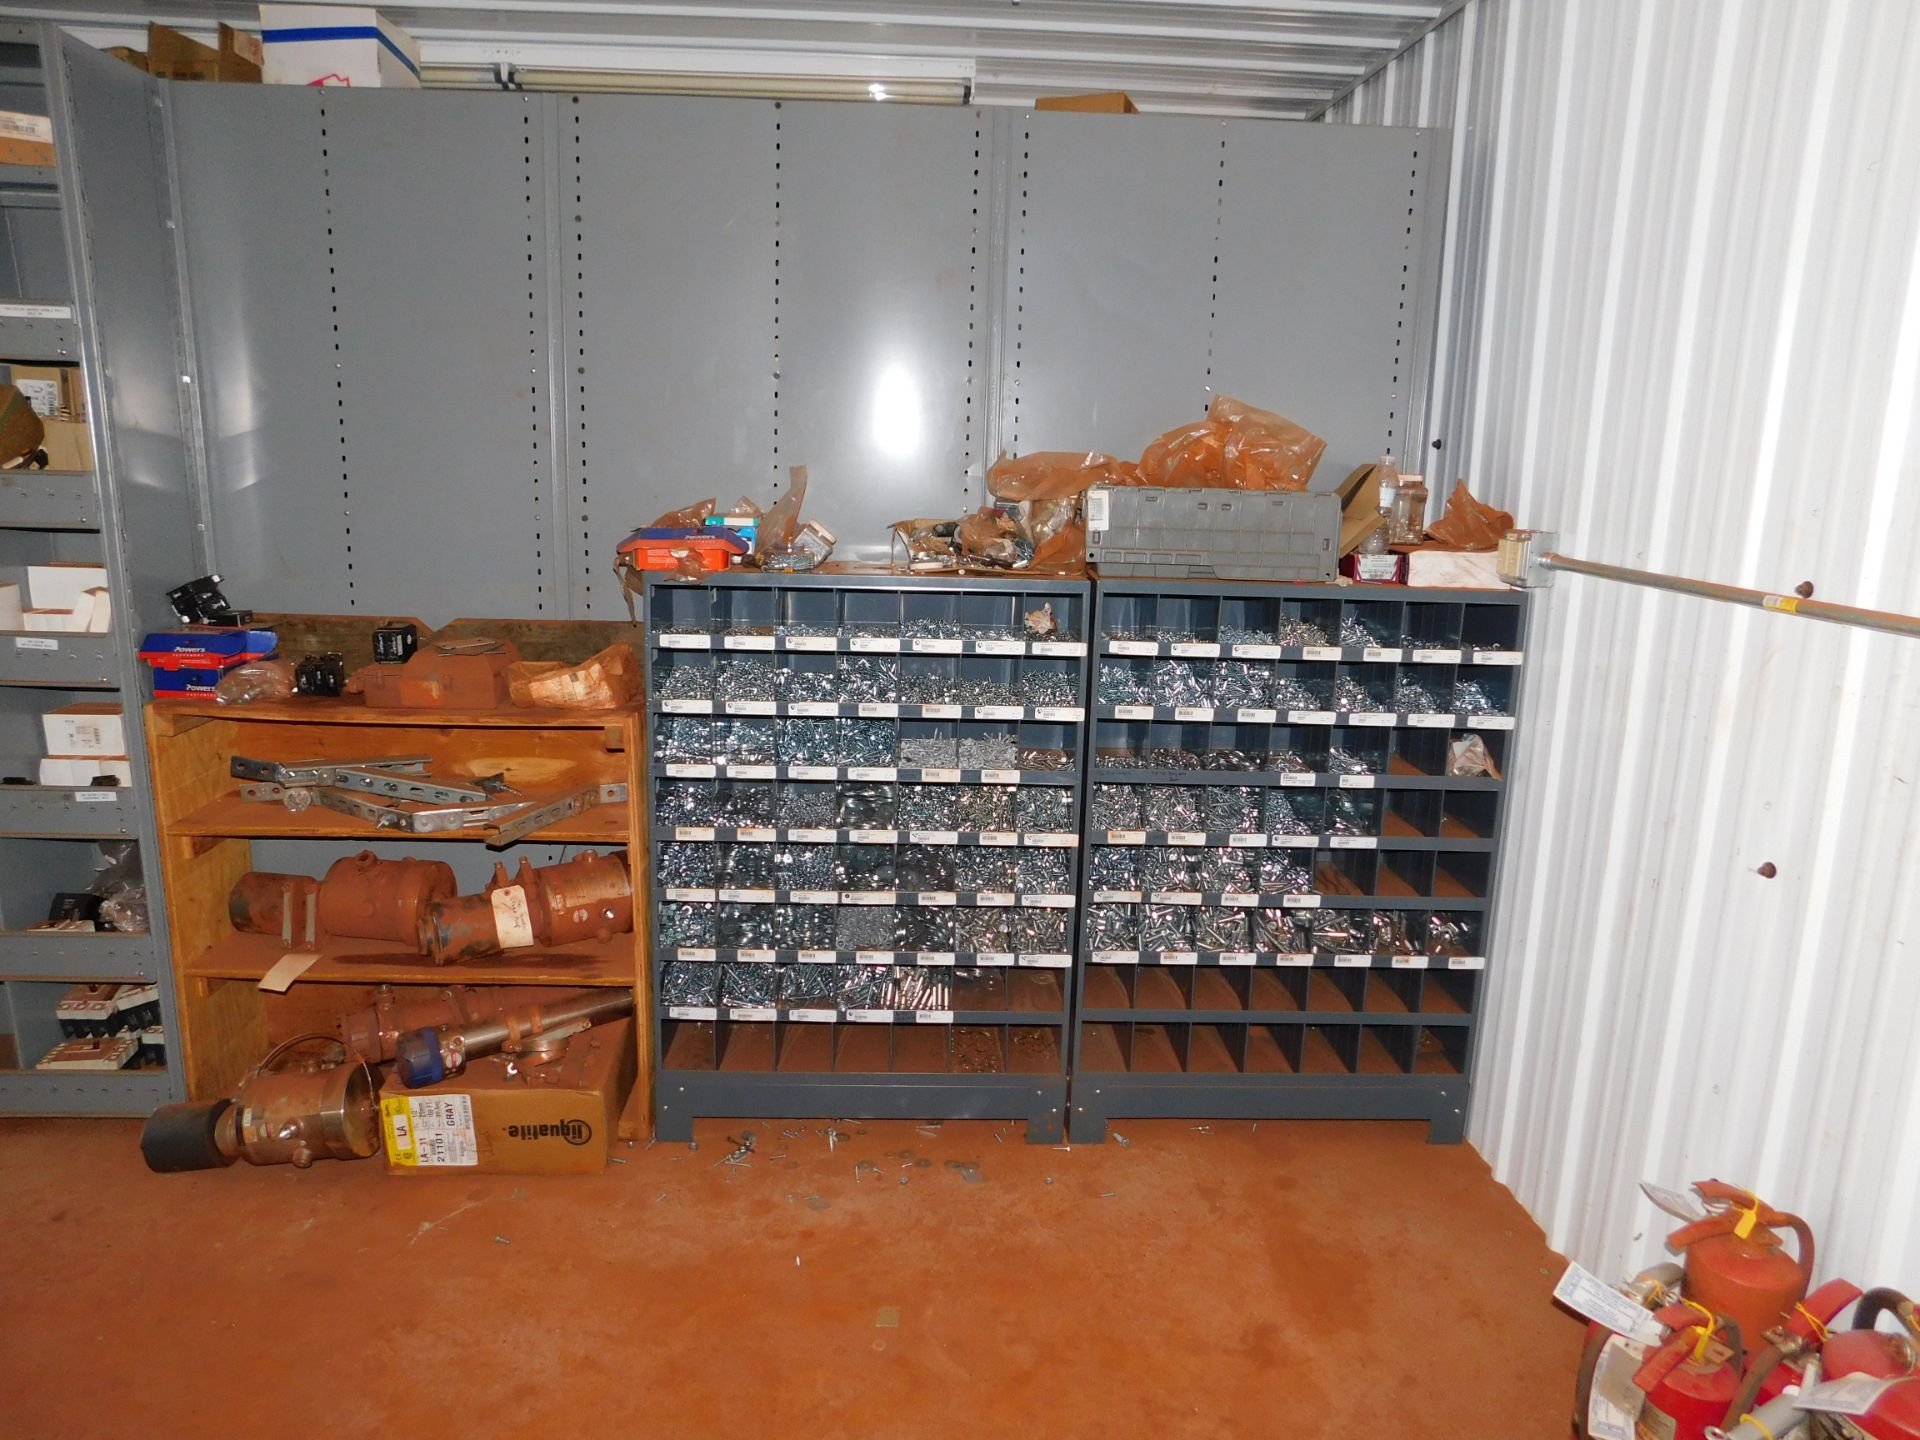 contents of electrical room - Image 11 of 13